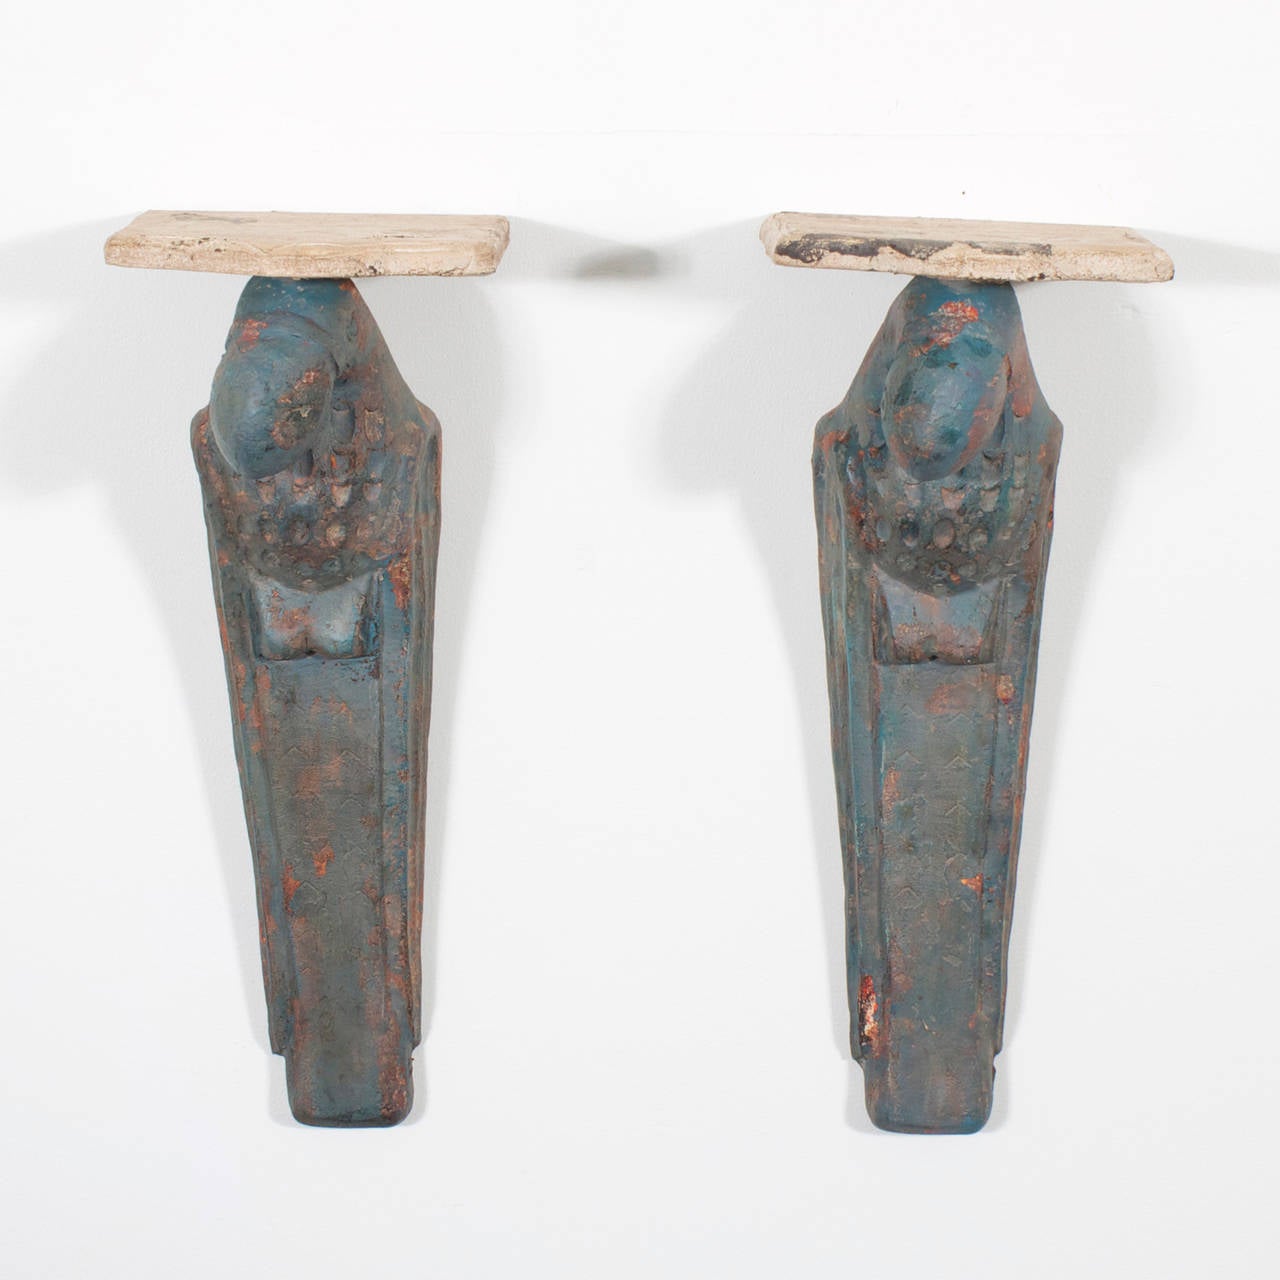 A whimsical pair of vintage composite parrot brackets in a preening posture with old distressed paint and natural terra cotta color shaped shelves.